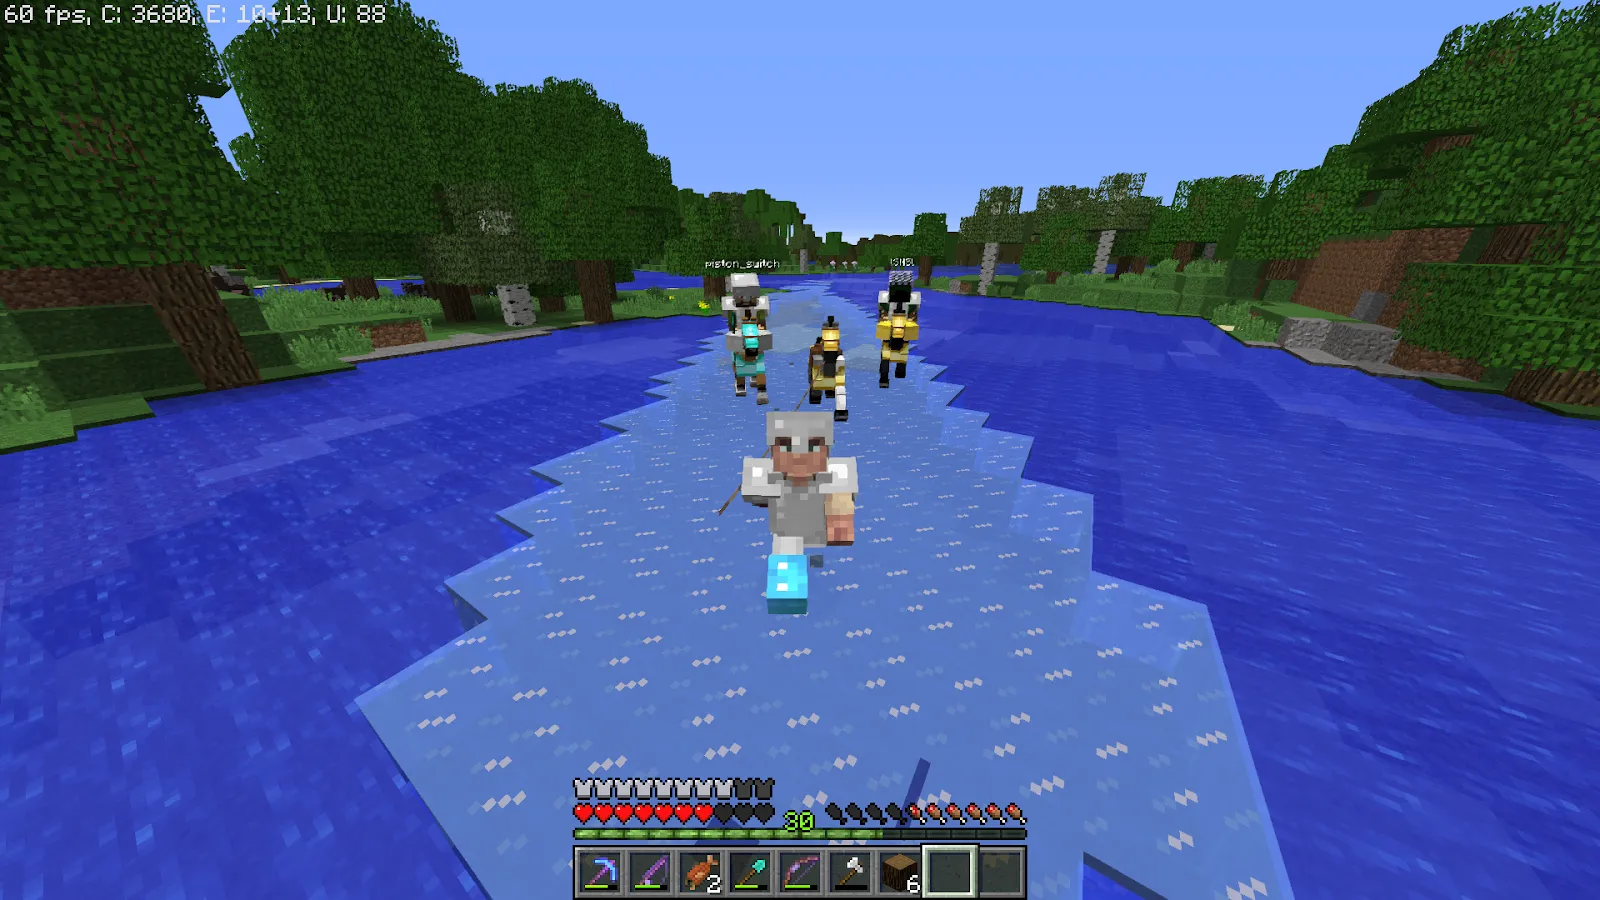 An image of multiple players walking on ice in Minecraft